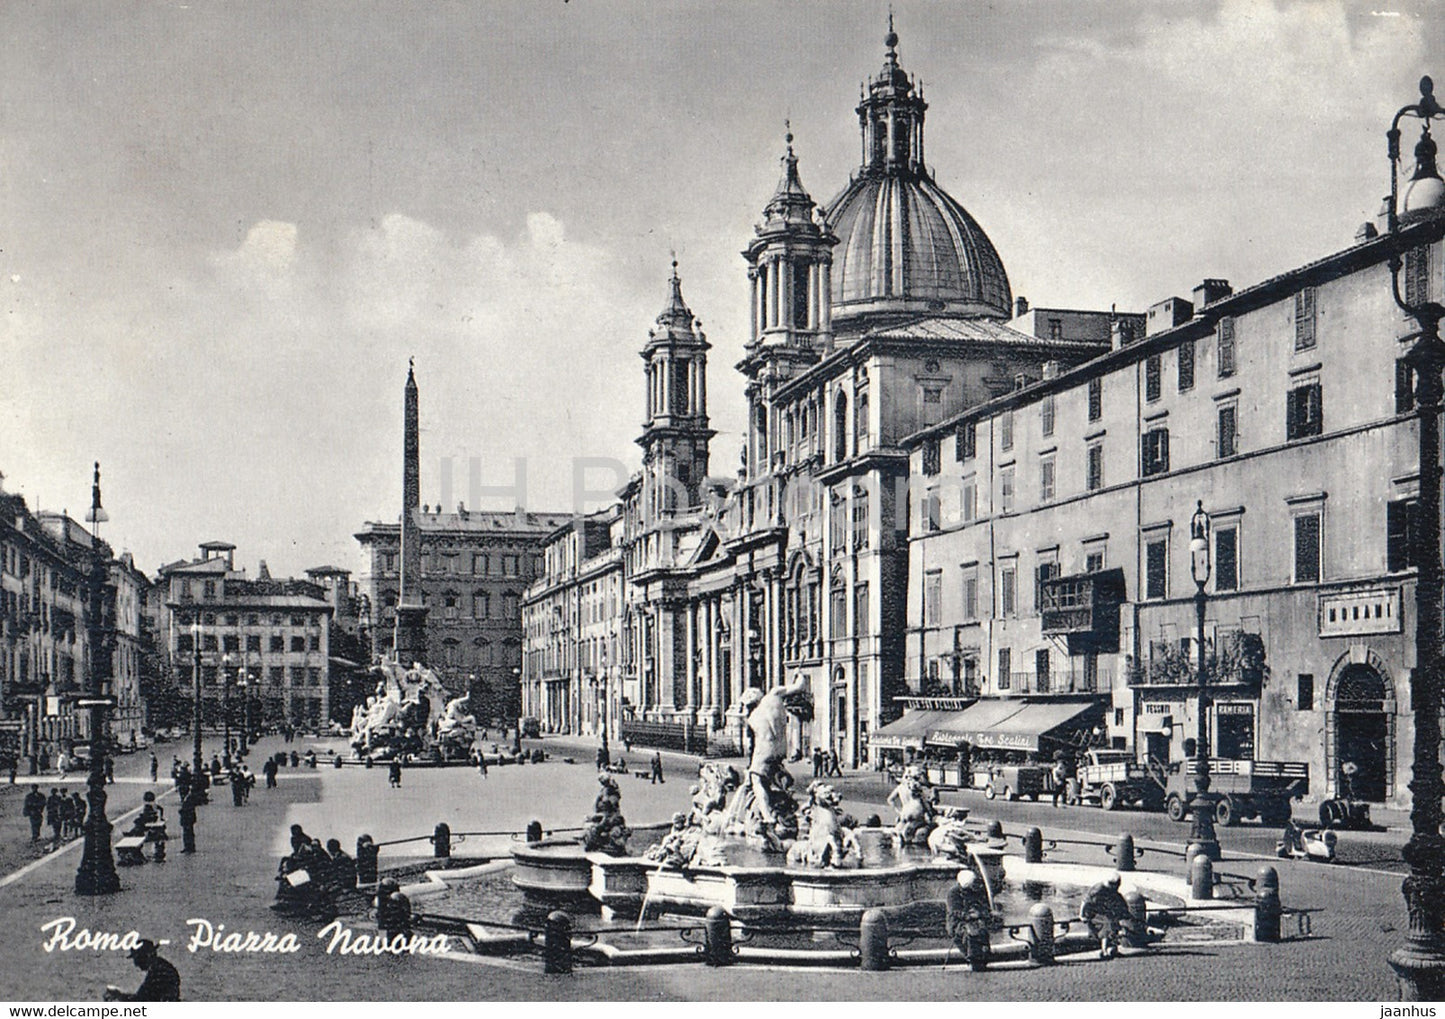 Roma - Rome - Piazza Navona - square - 1965 - Italy - used - JH Postcards